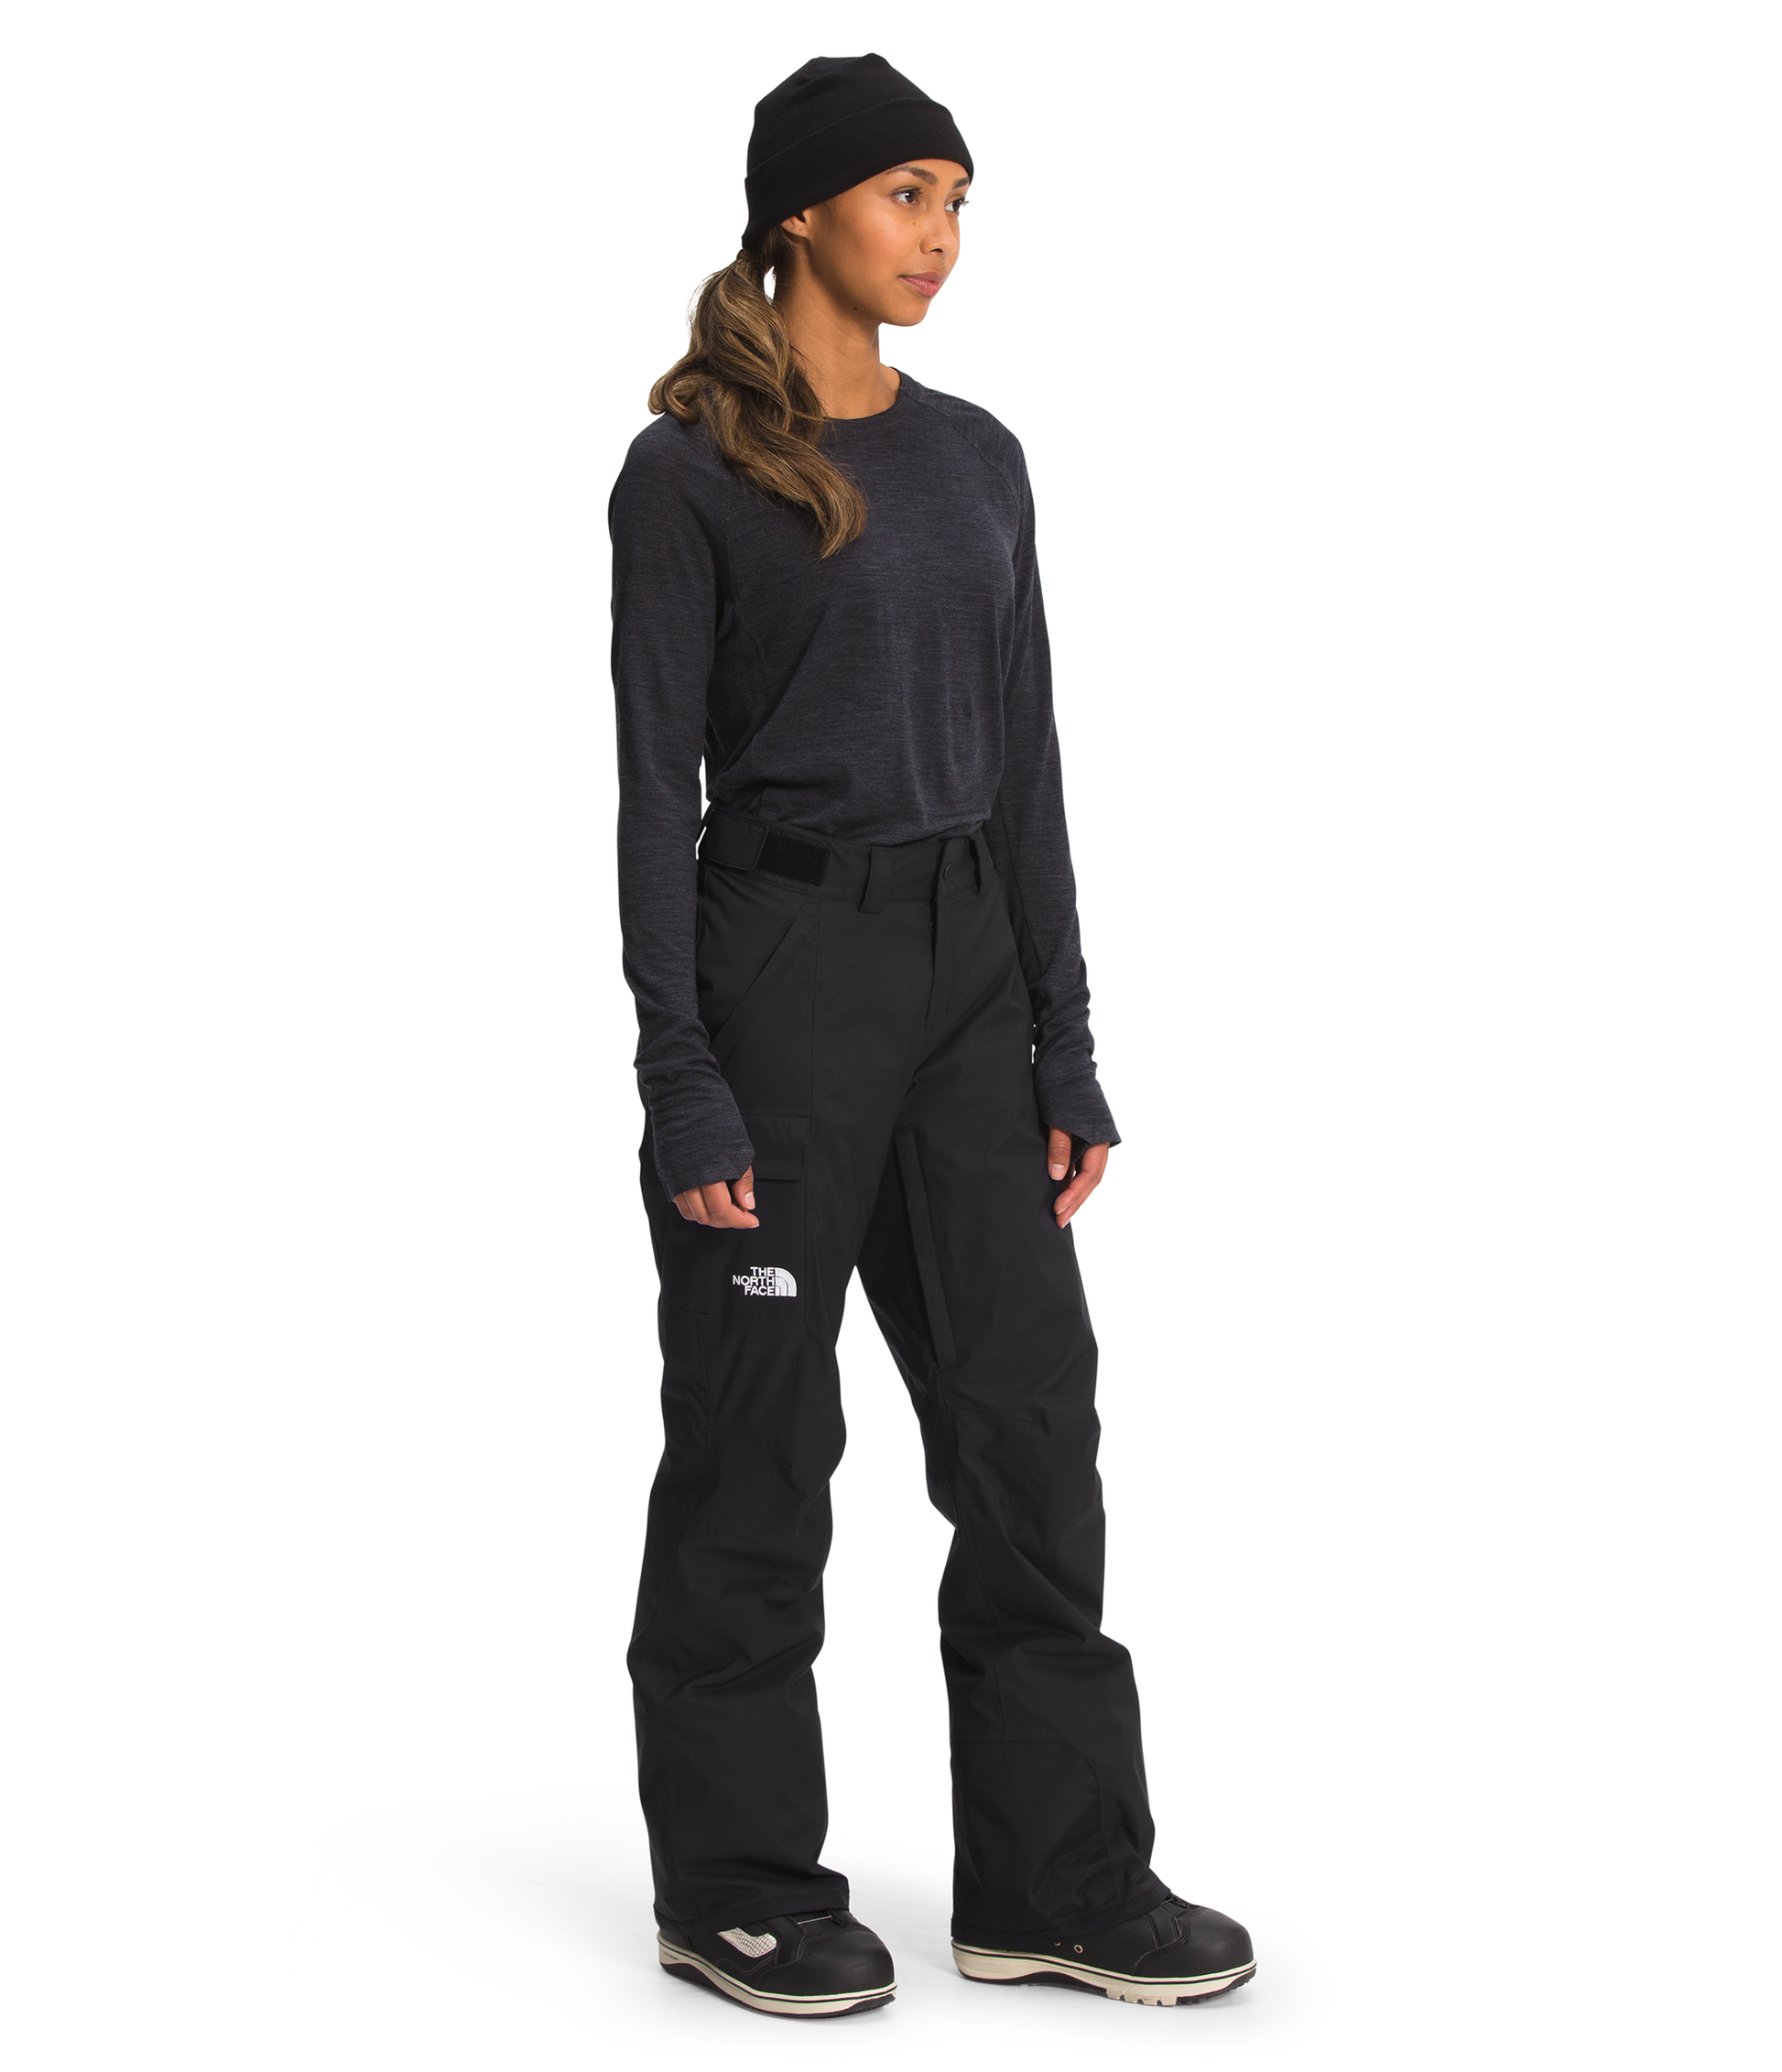 The North Face Freedom Insulated Ski Pants - Women’s